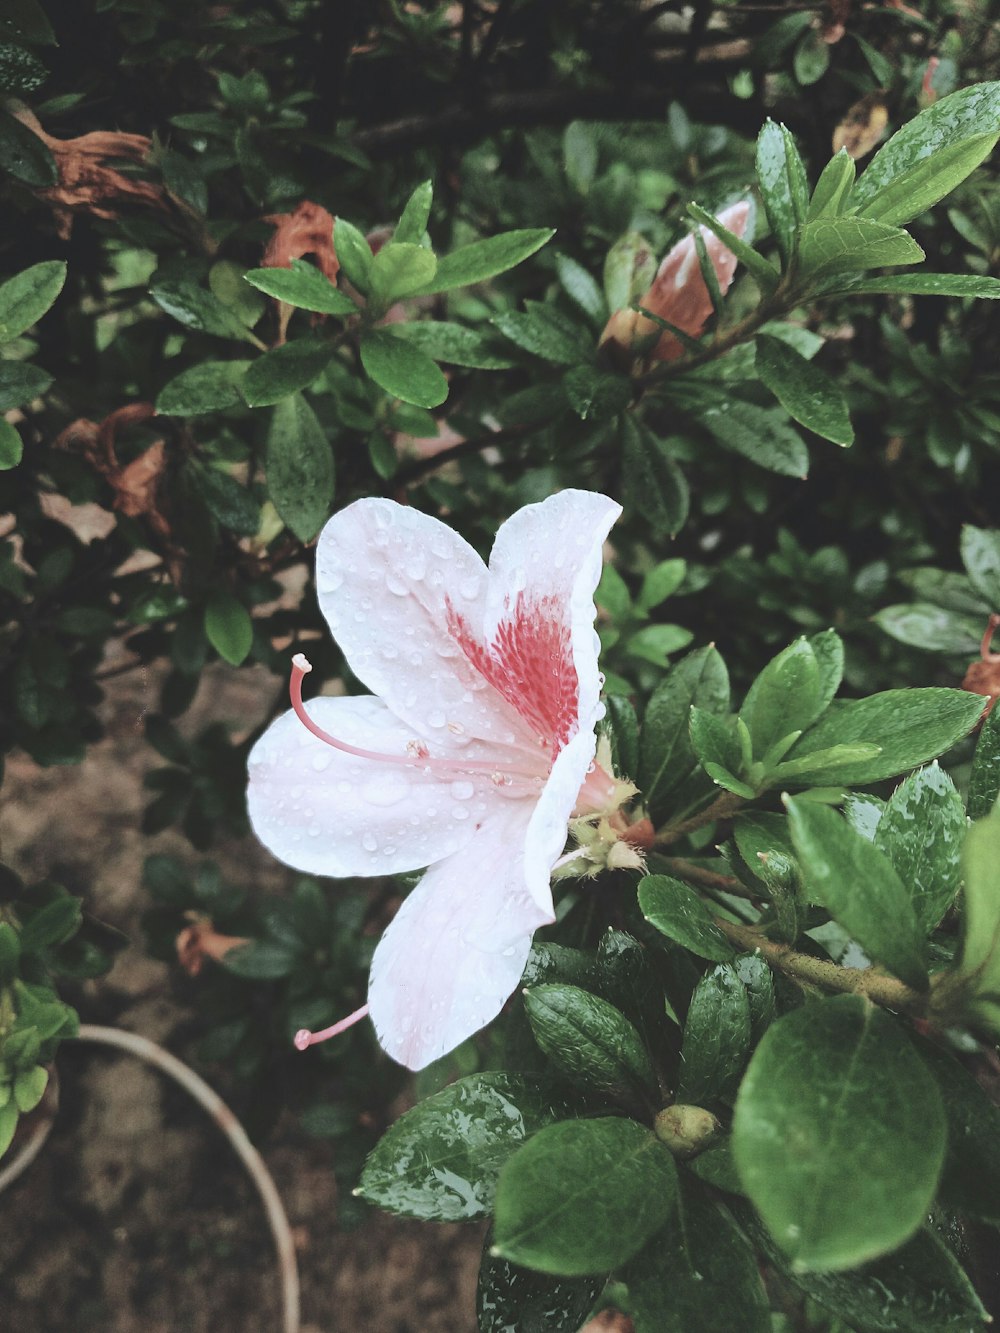 closed-up photo of white and pink petaled flower